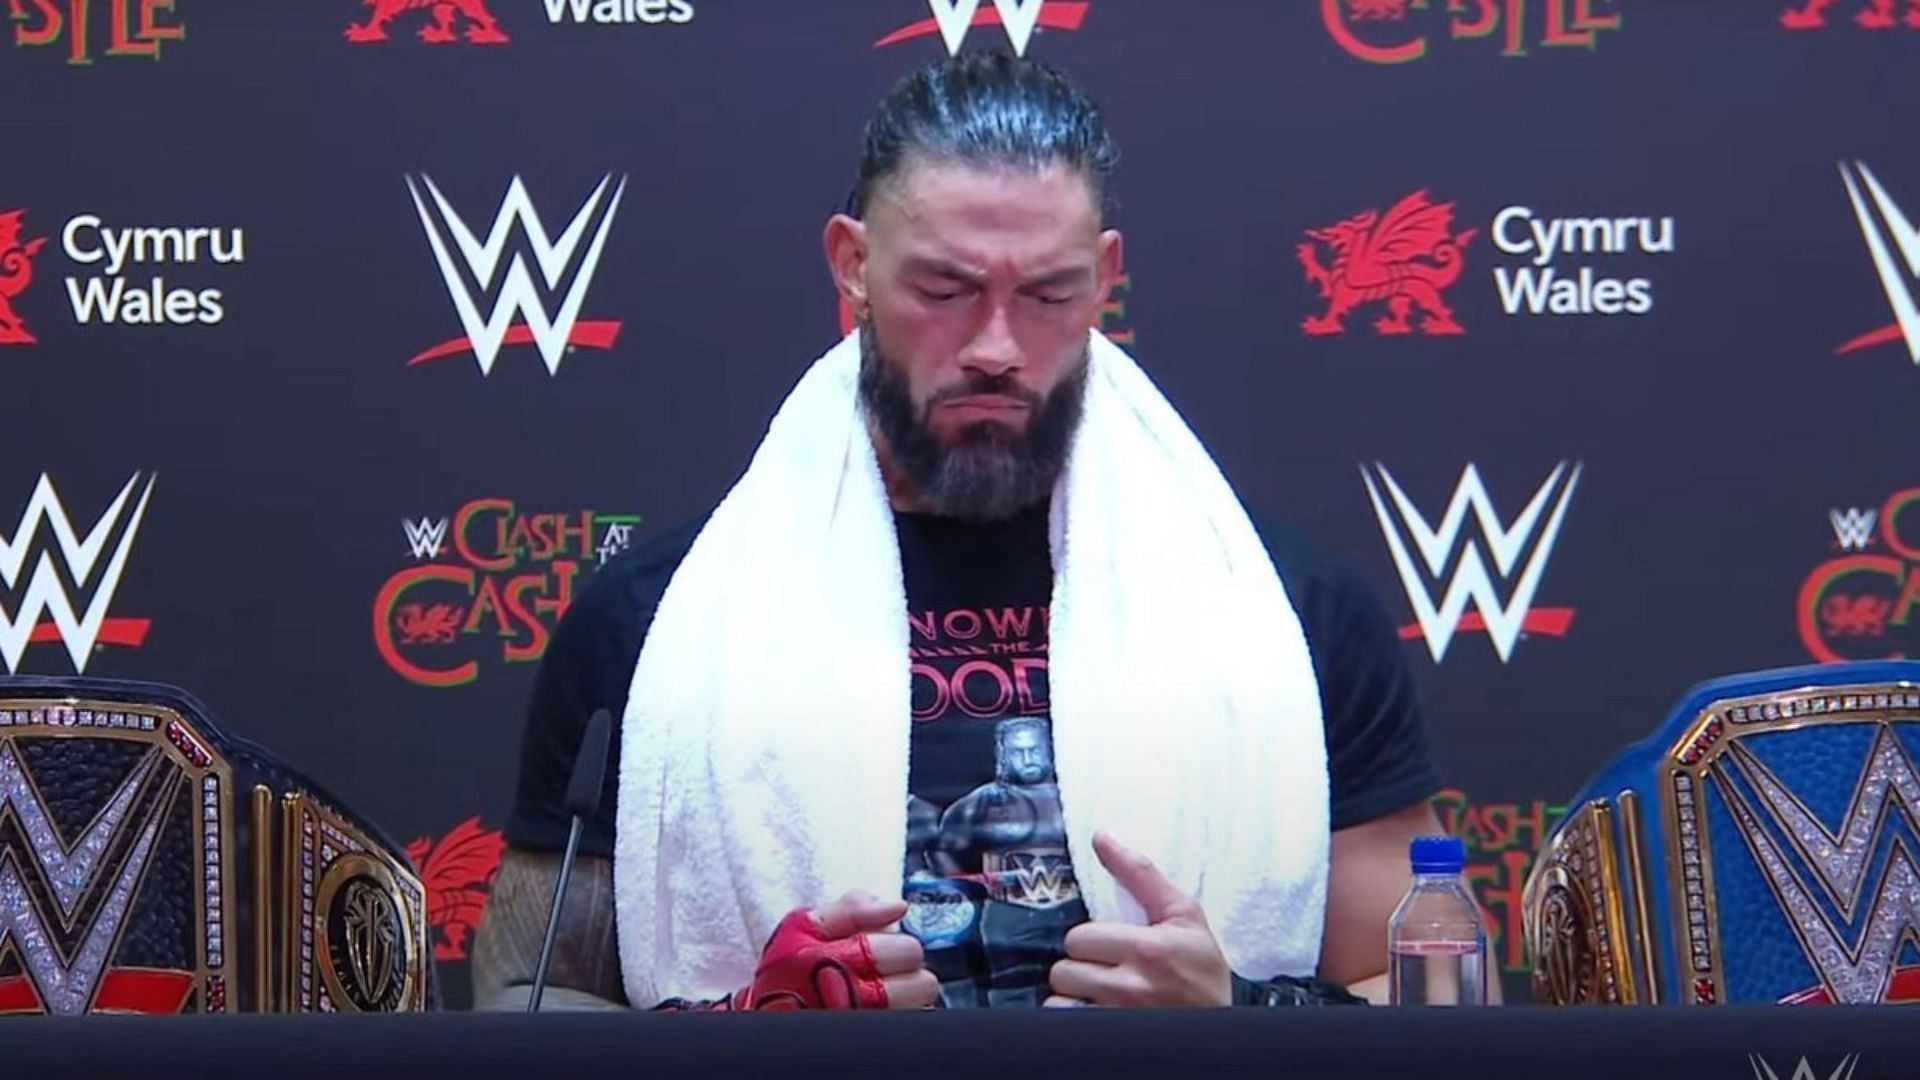 Roman Reigns shoved his upcoming title challenger at the Las Vegas press conference